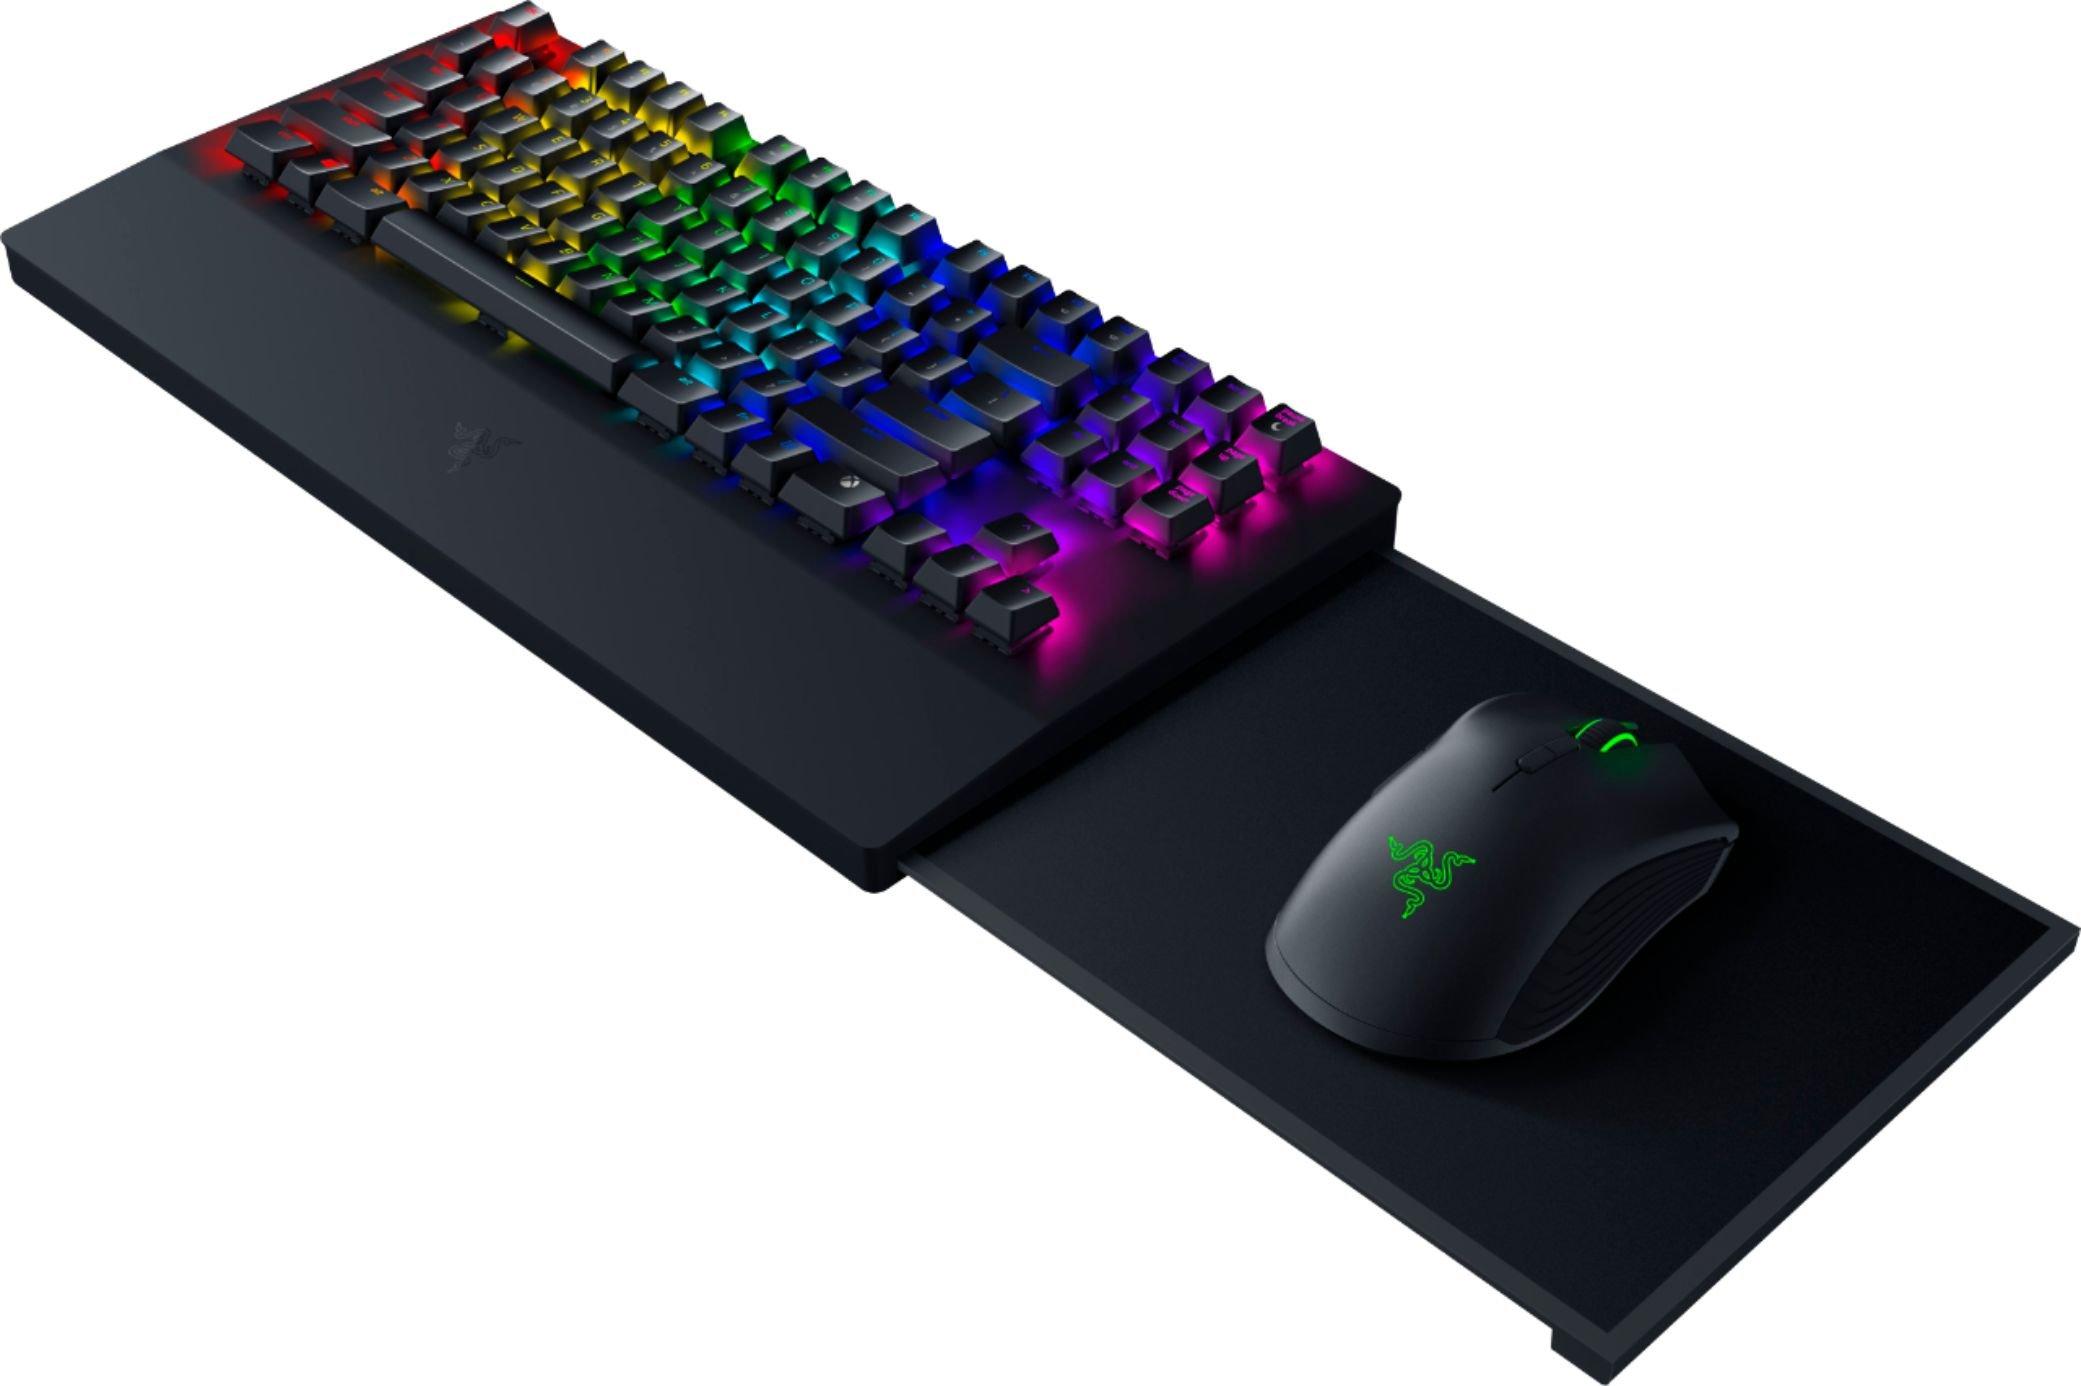 Best Xbox Keyboard And Mouse In 2022 - GameSpot